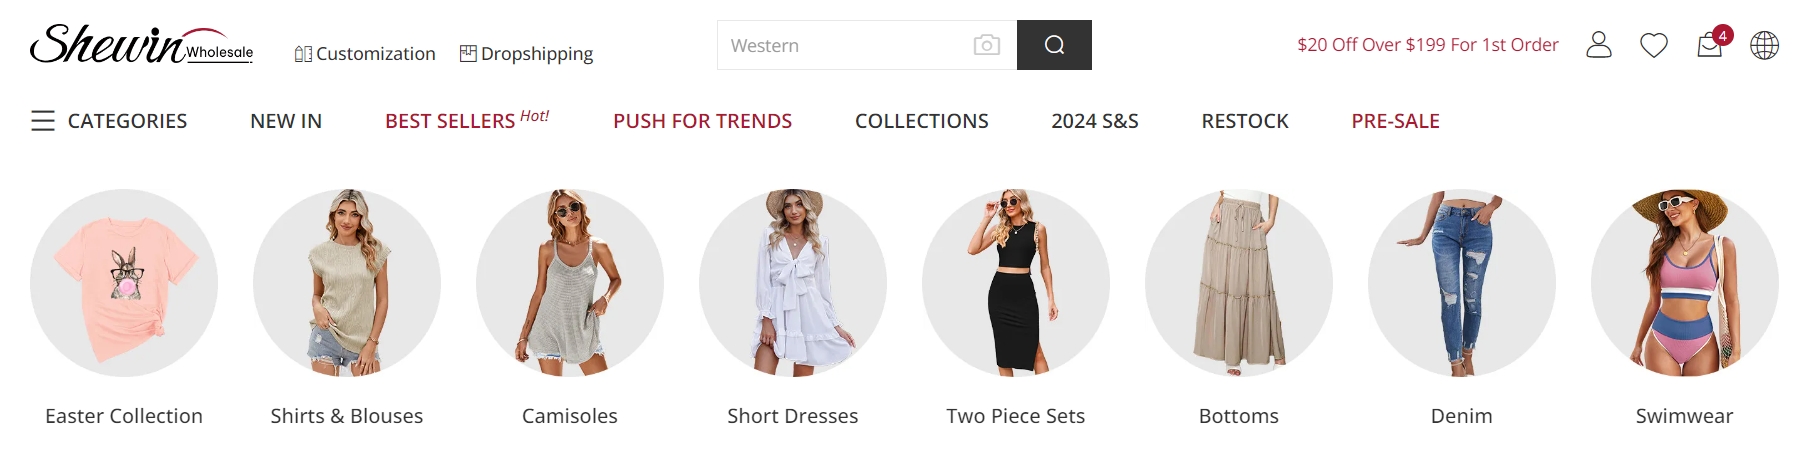 Clothing Supplier for Boutiques